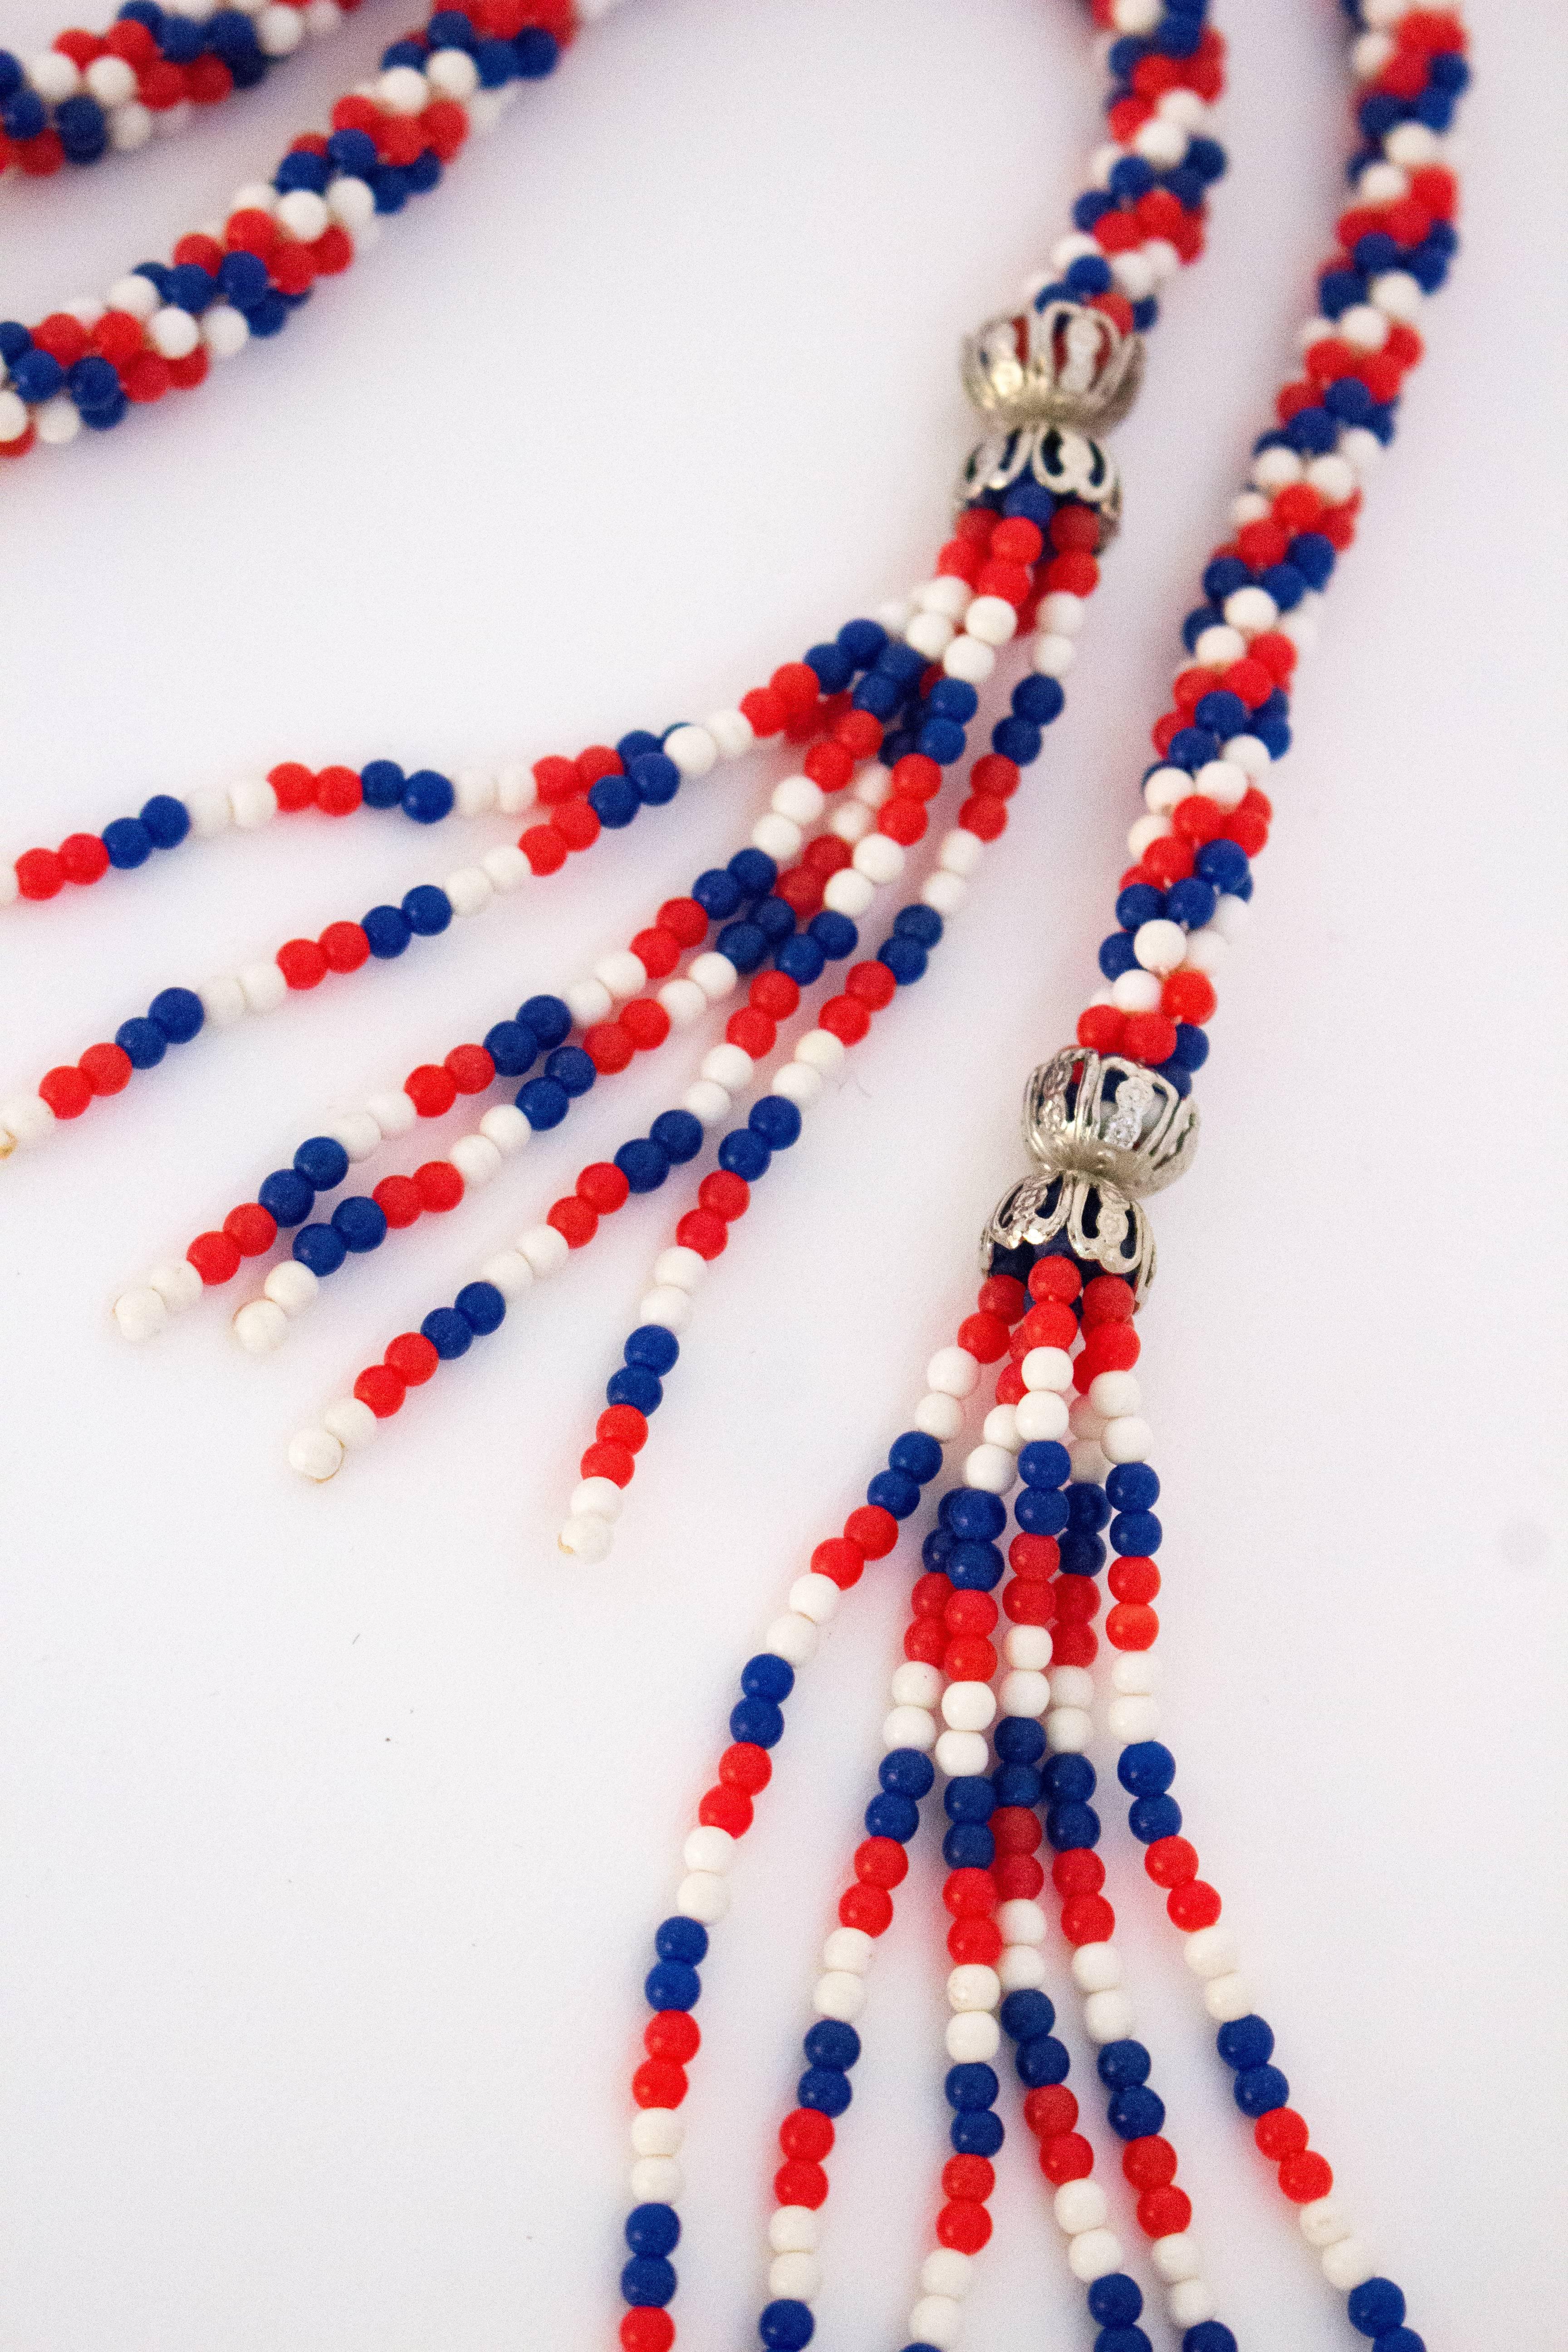 60s Red, White & Blue Rope Necklace. Silver toned bead ends at tops of tassels. Plastic beads. 

